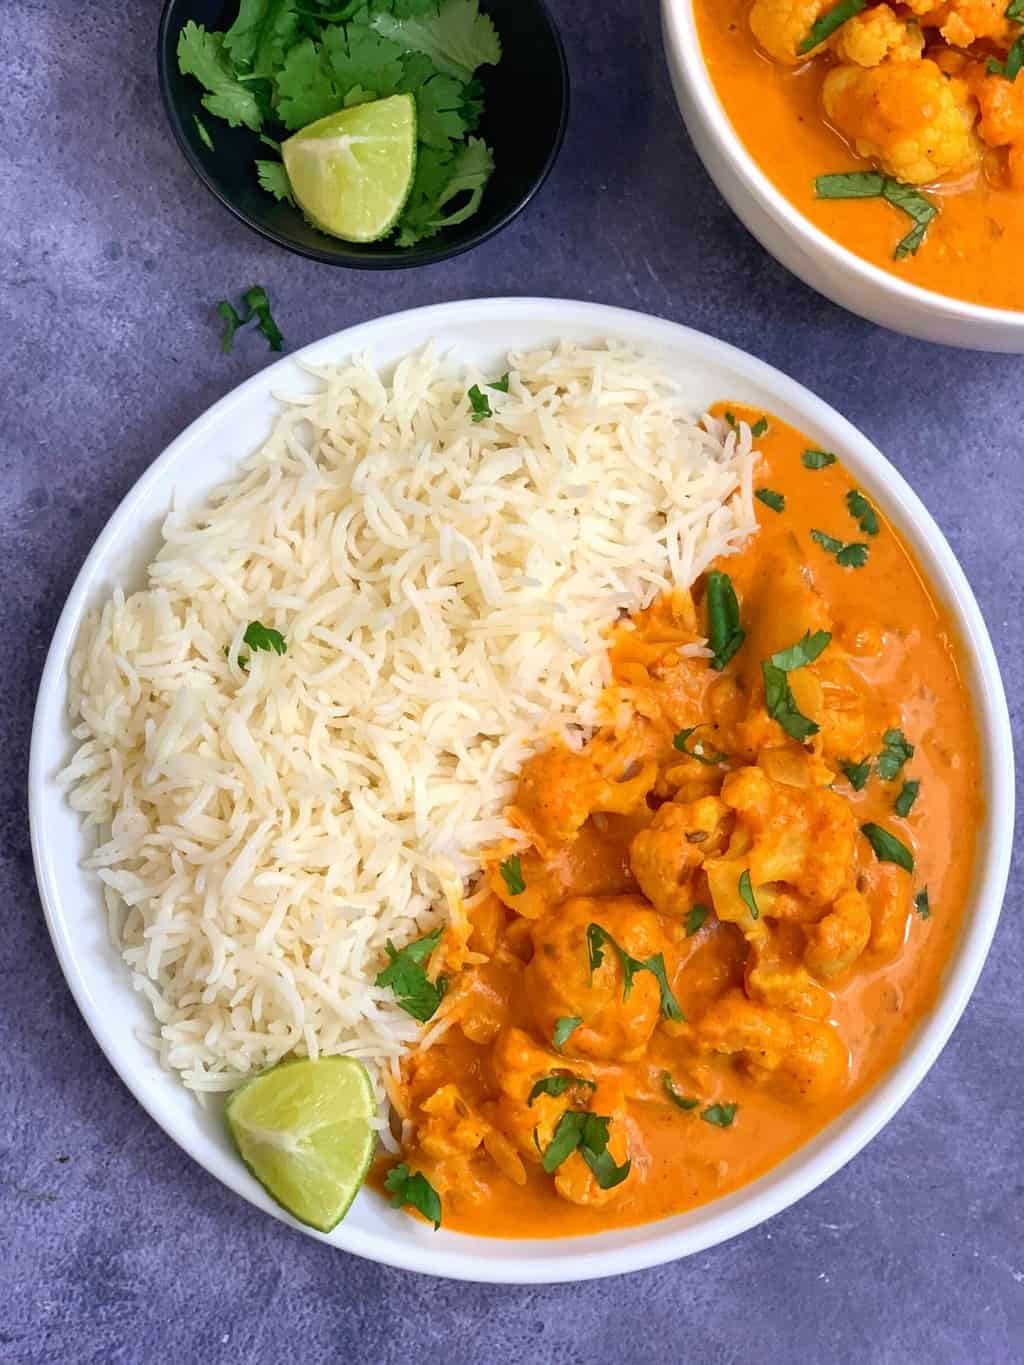 Serve the coconut cauliflower curry on a plate with basmati rice and passion fruit